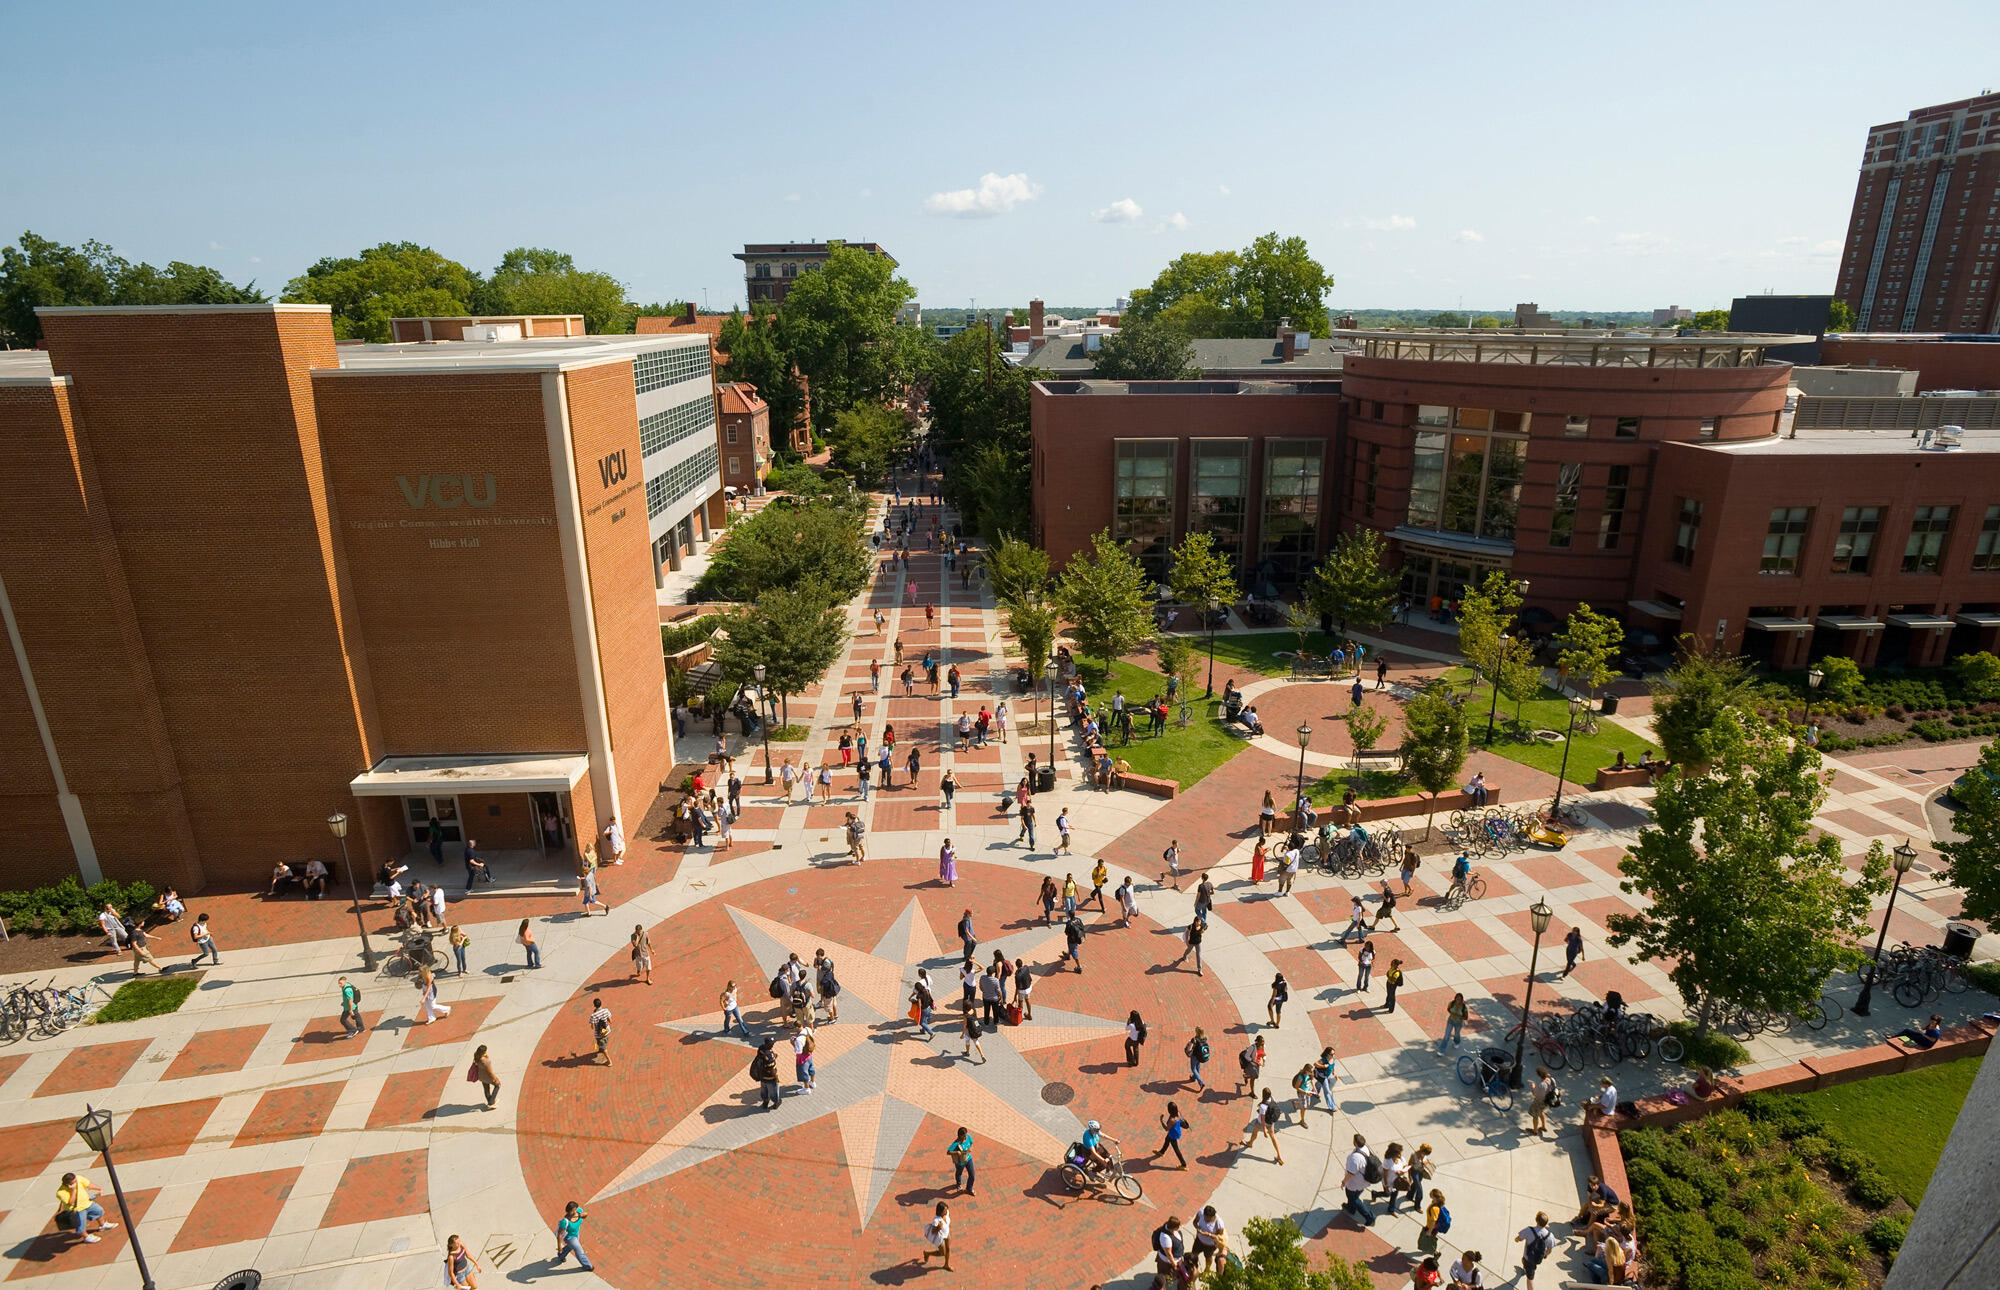 An areal view of the VCU Compass plaza 